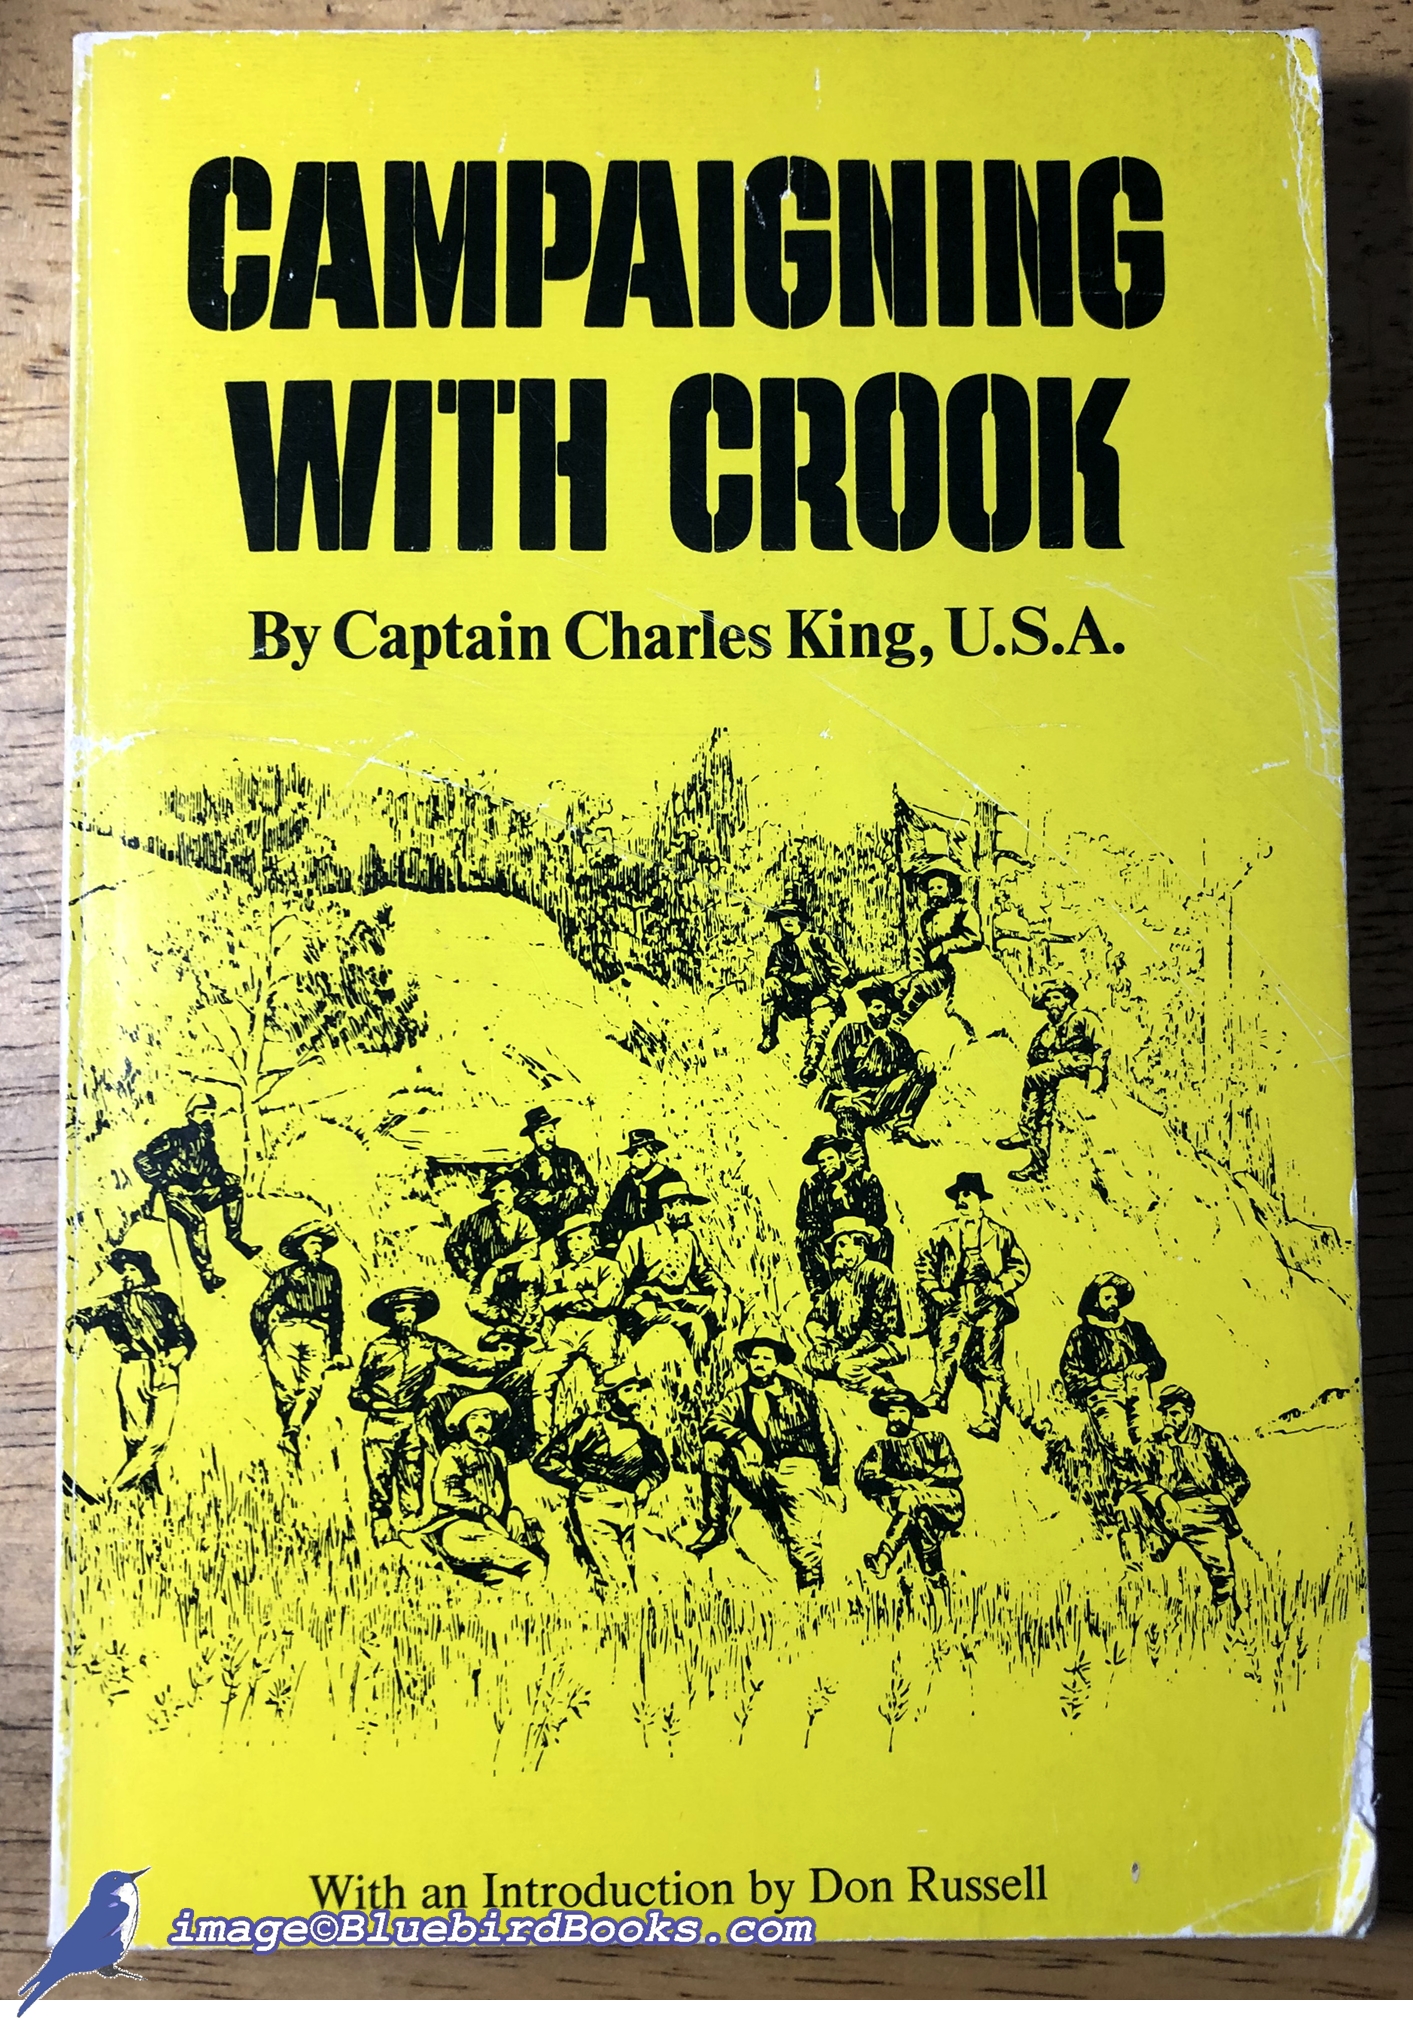 KING, CAPTAIN CHARLES - Campaigning with Crook